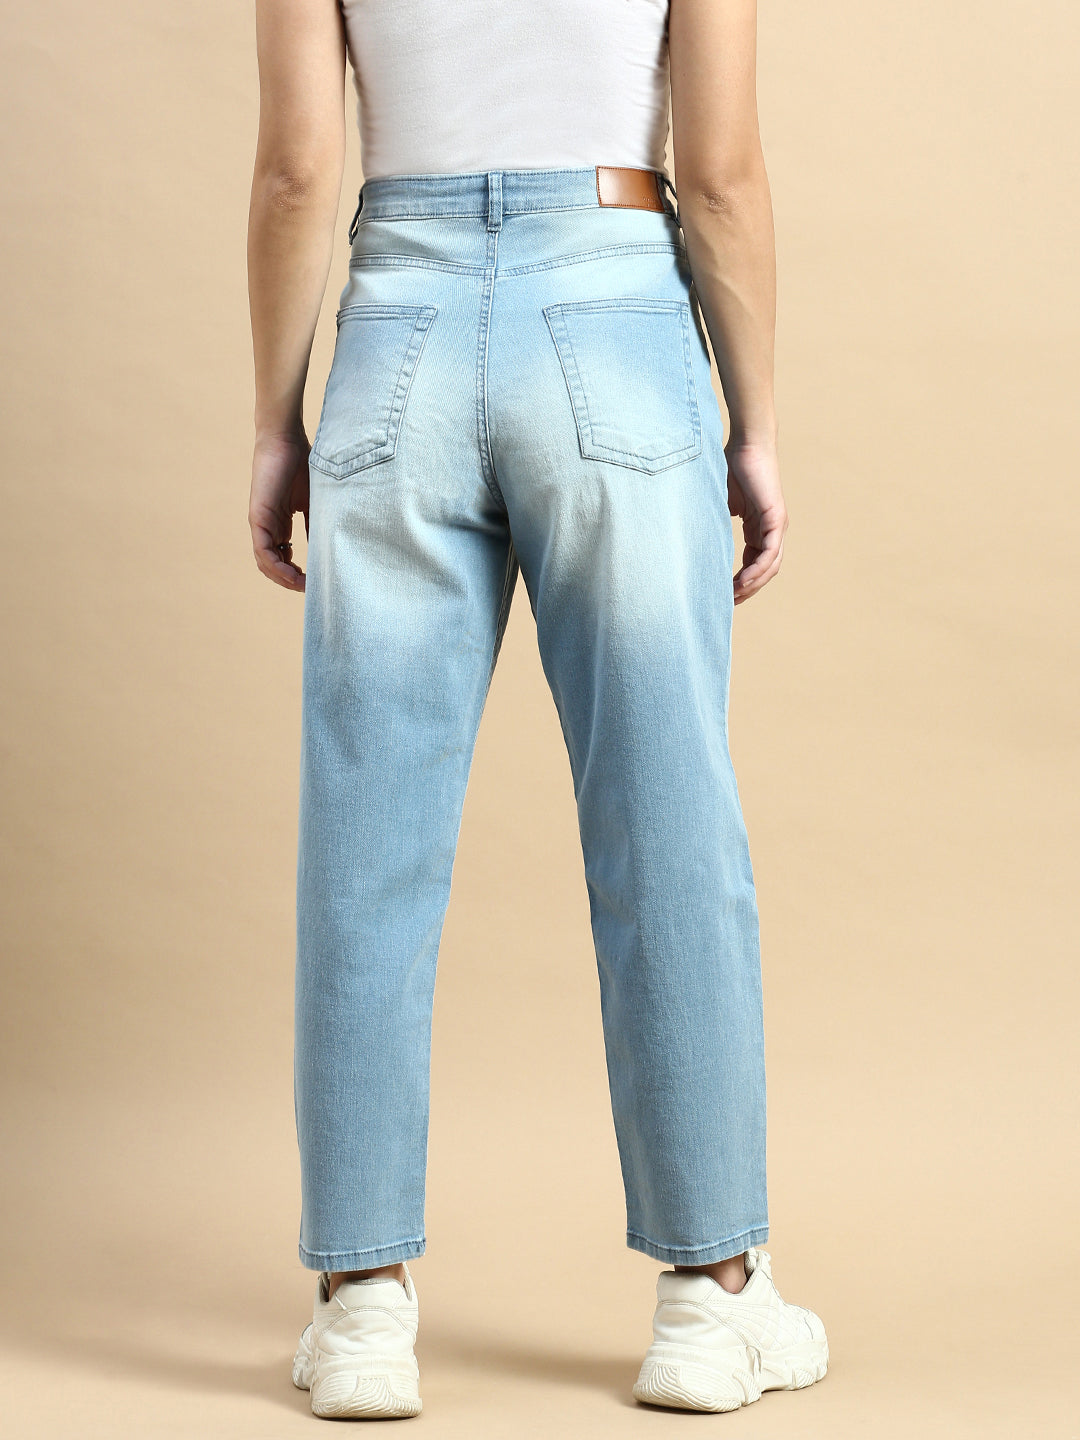 Jeans Mom Fit-Ice Blue - De Moza